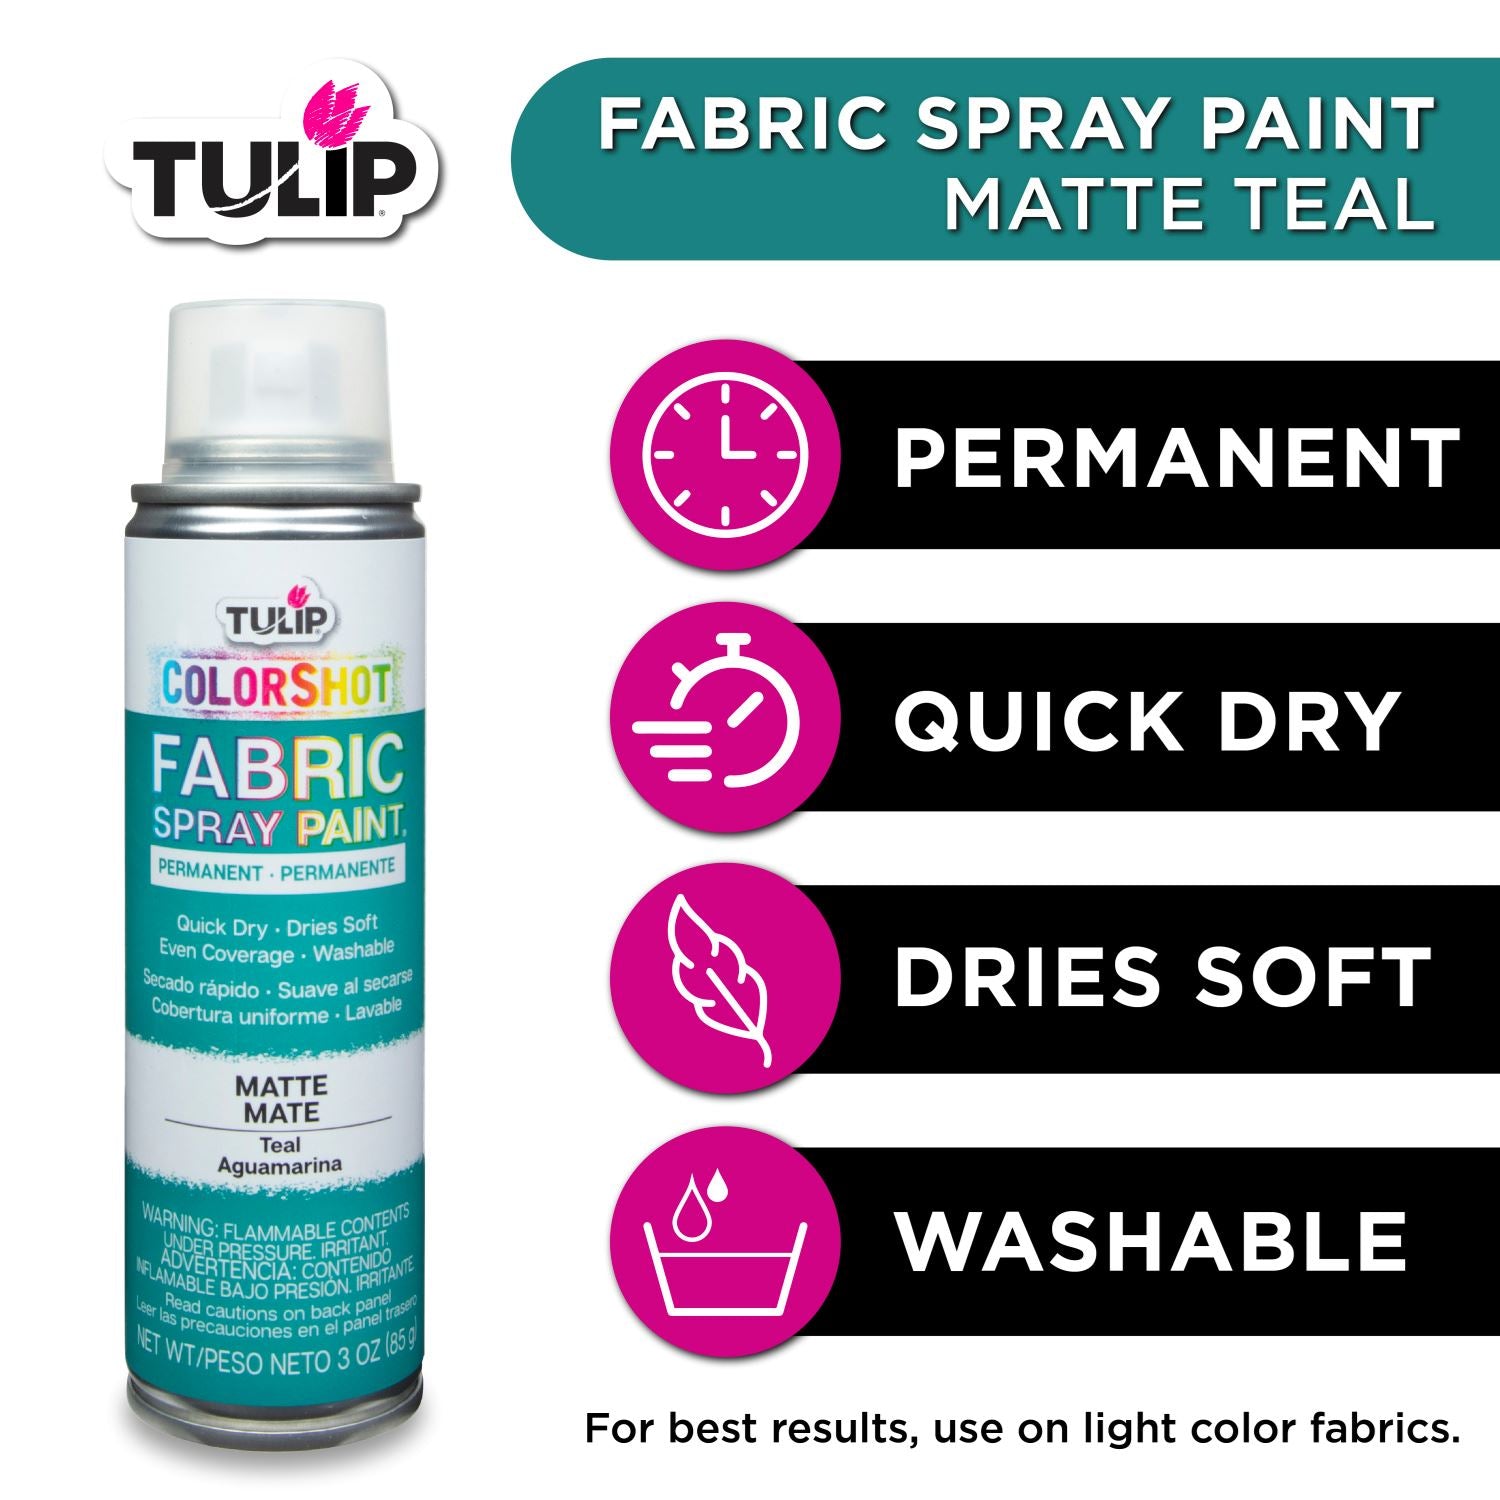 fabric spray paint matte teal. permanent. quick dry. dries soft. washable.